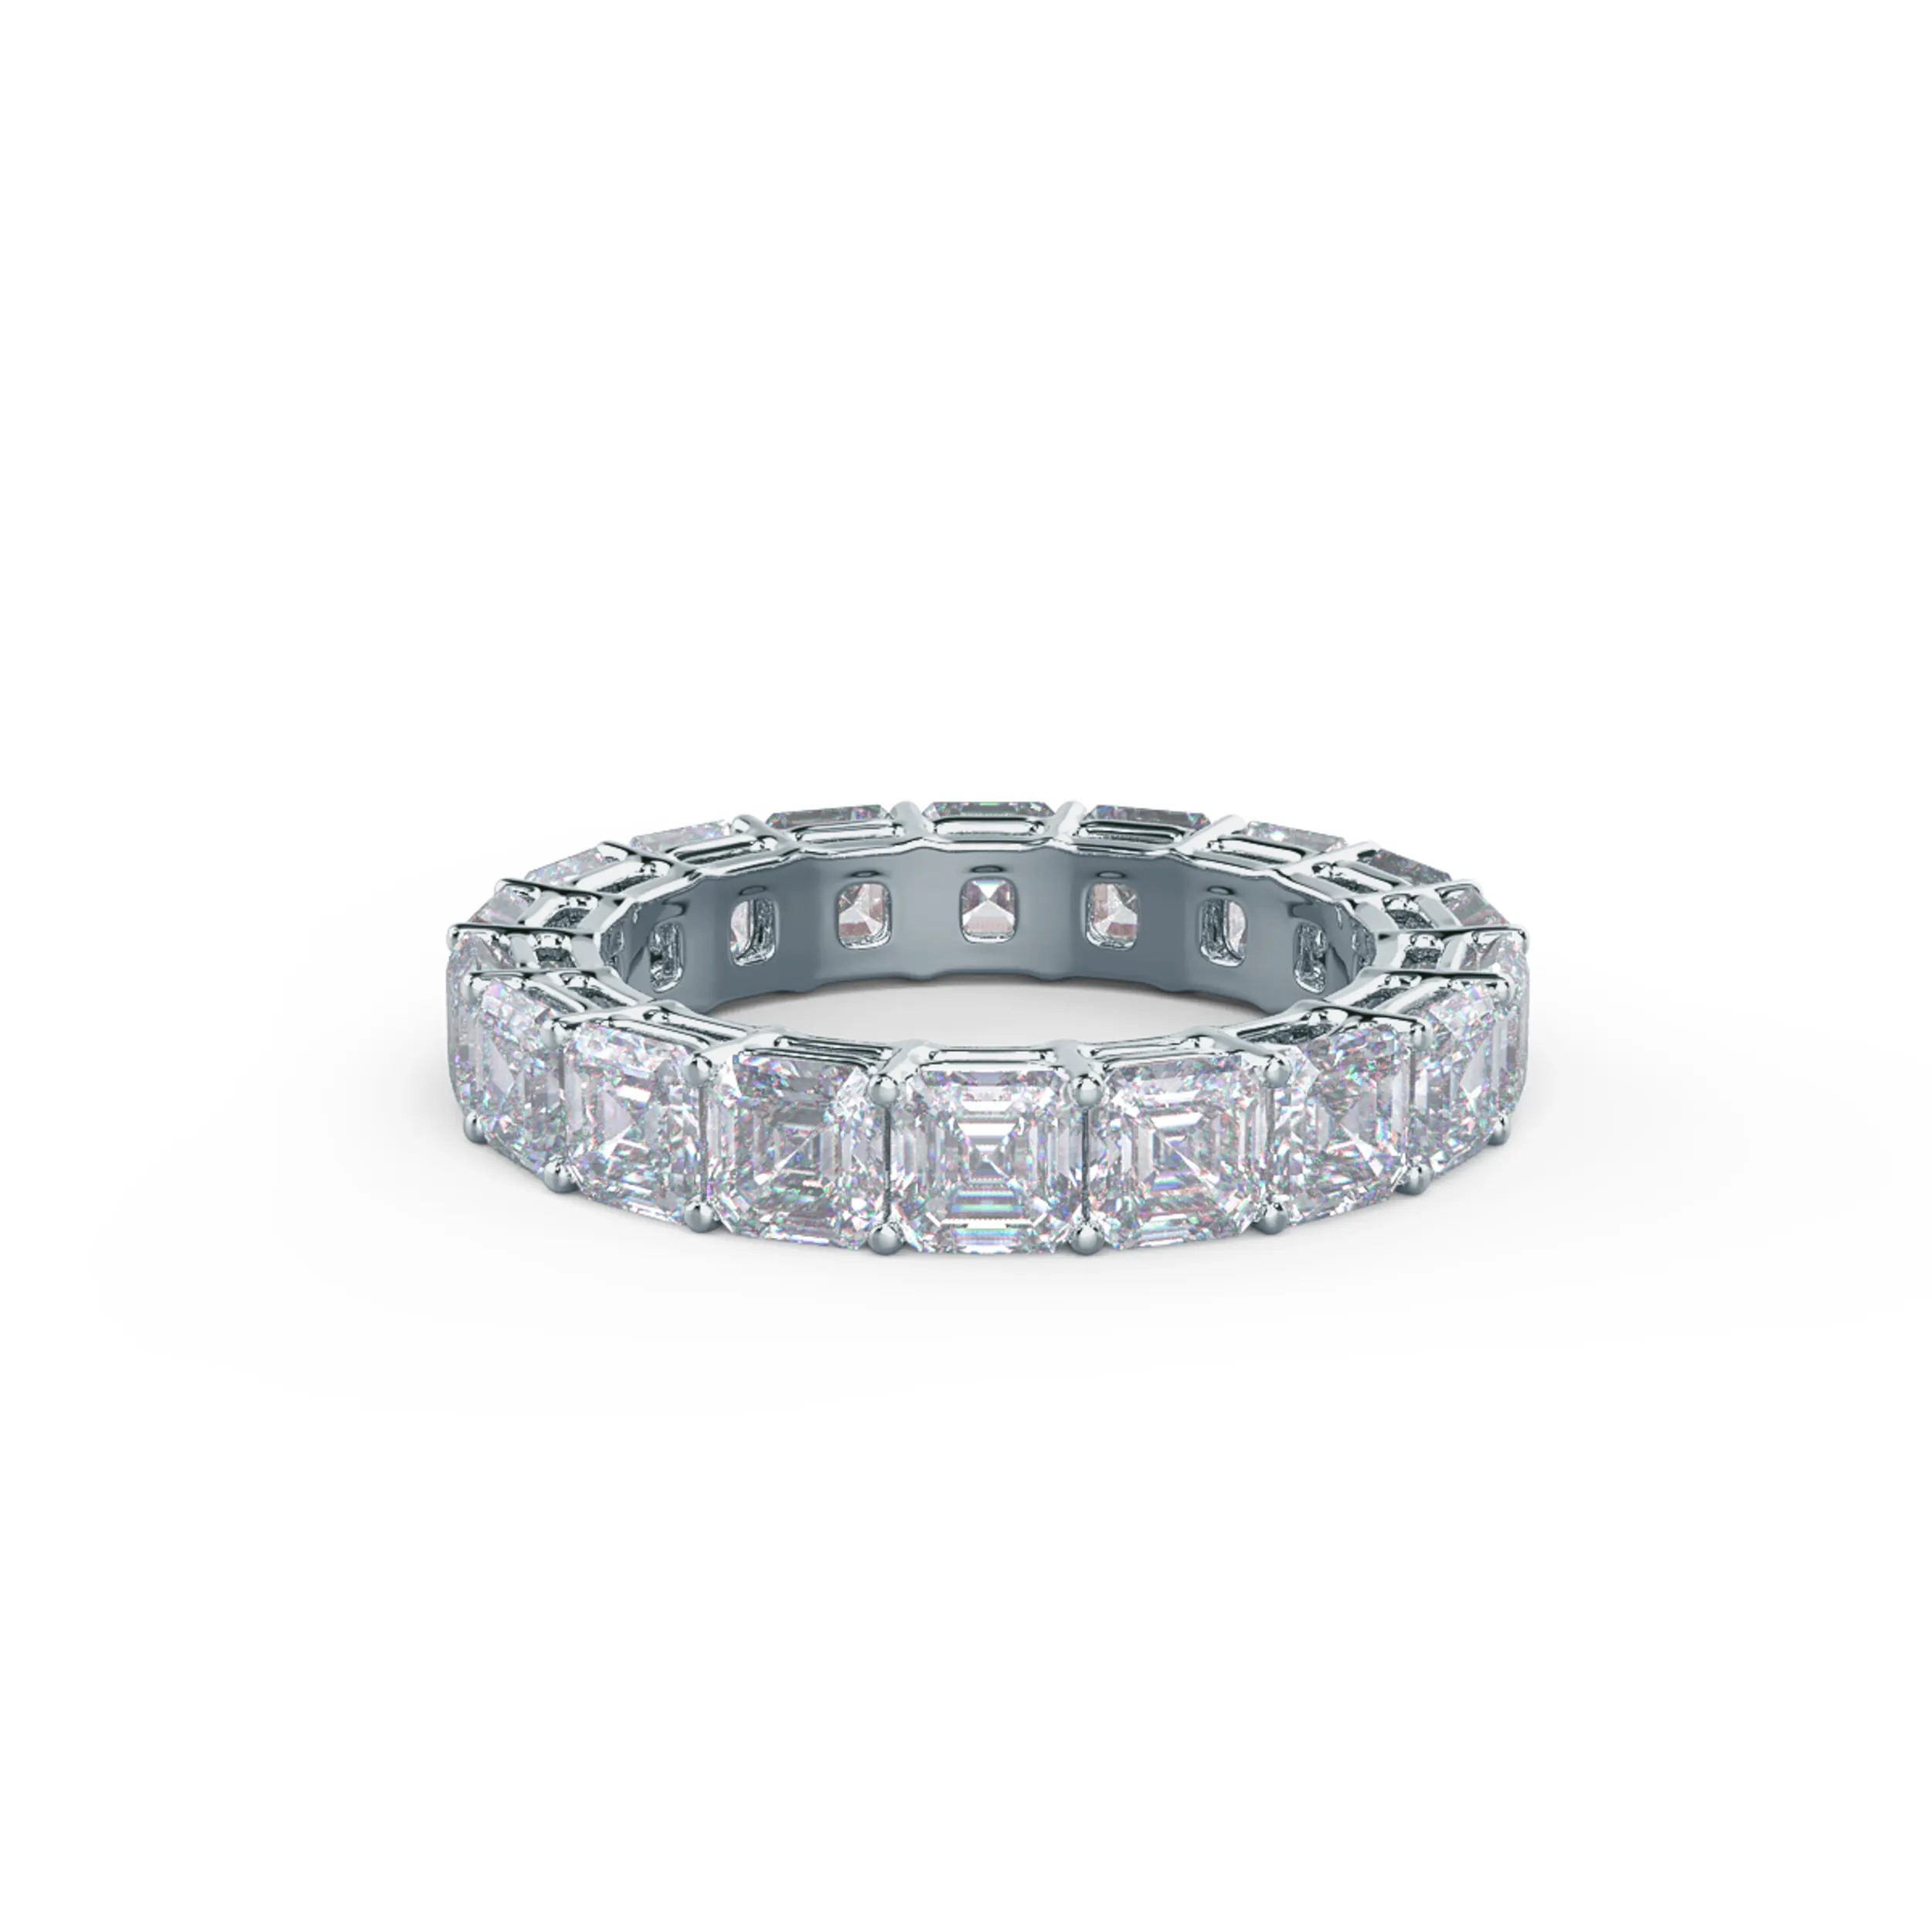 White Gold Asscher Eternity Band featuring Exceptional Quality 5.5 Carat Diamonds (Main View)